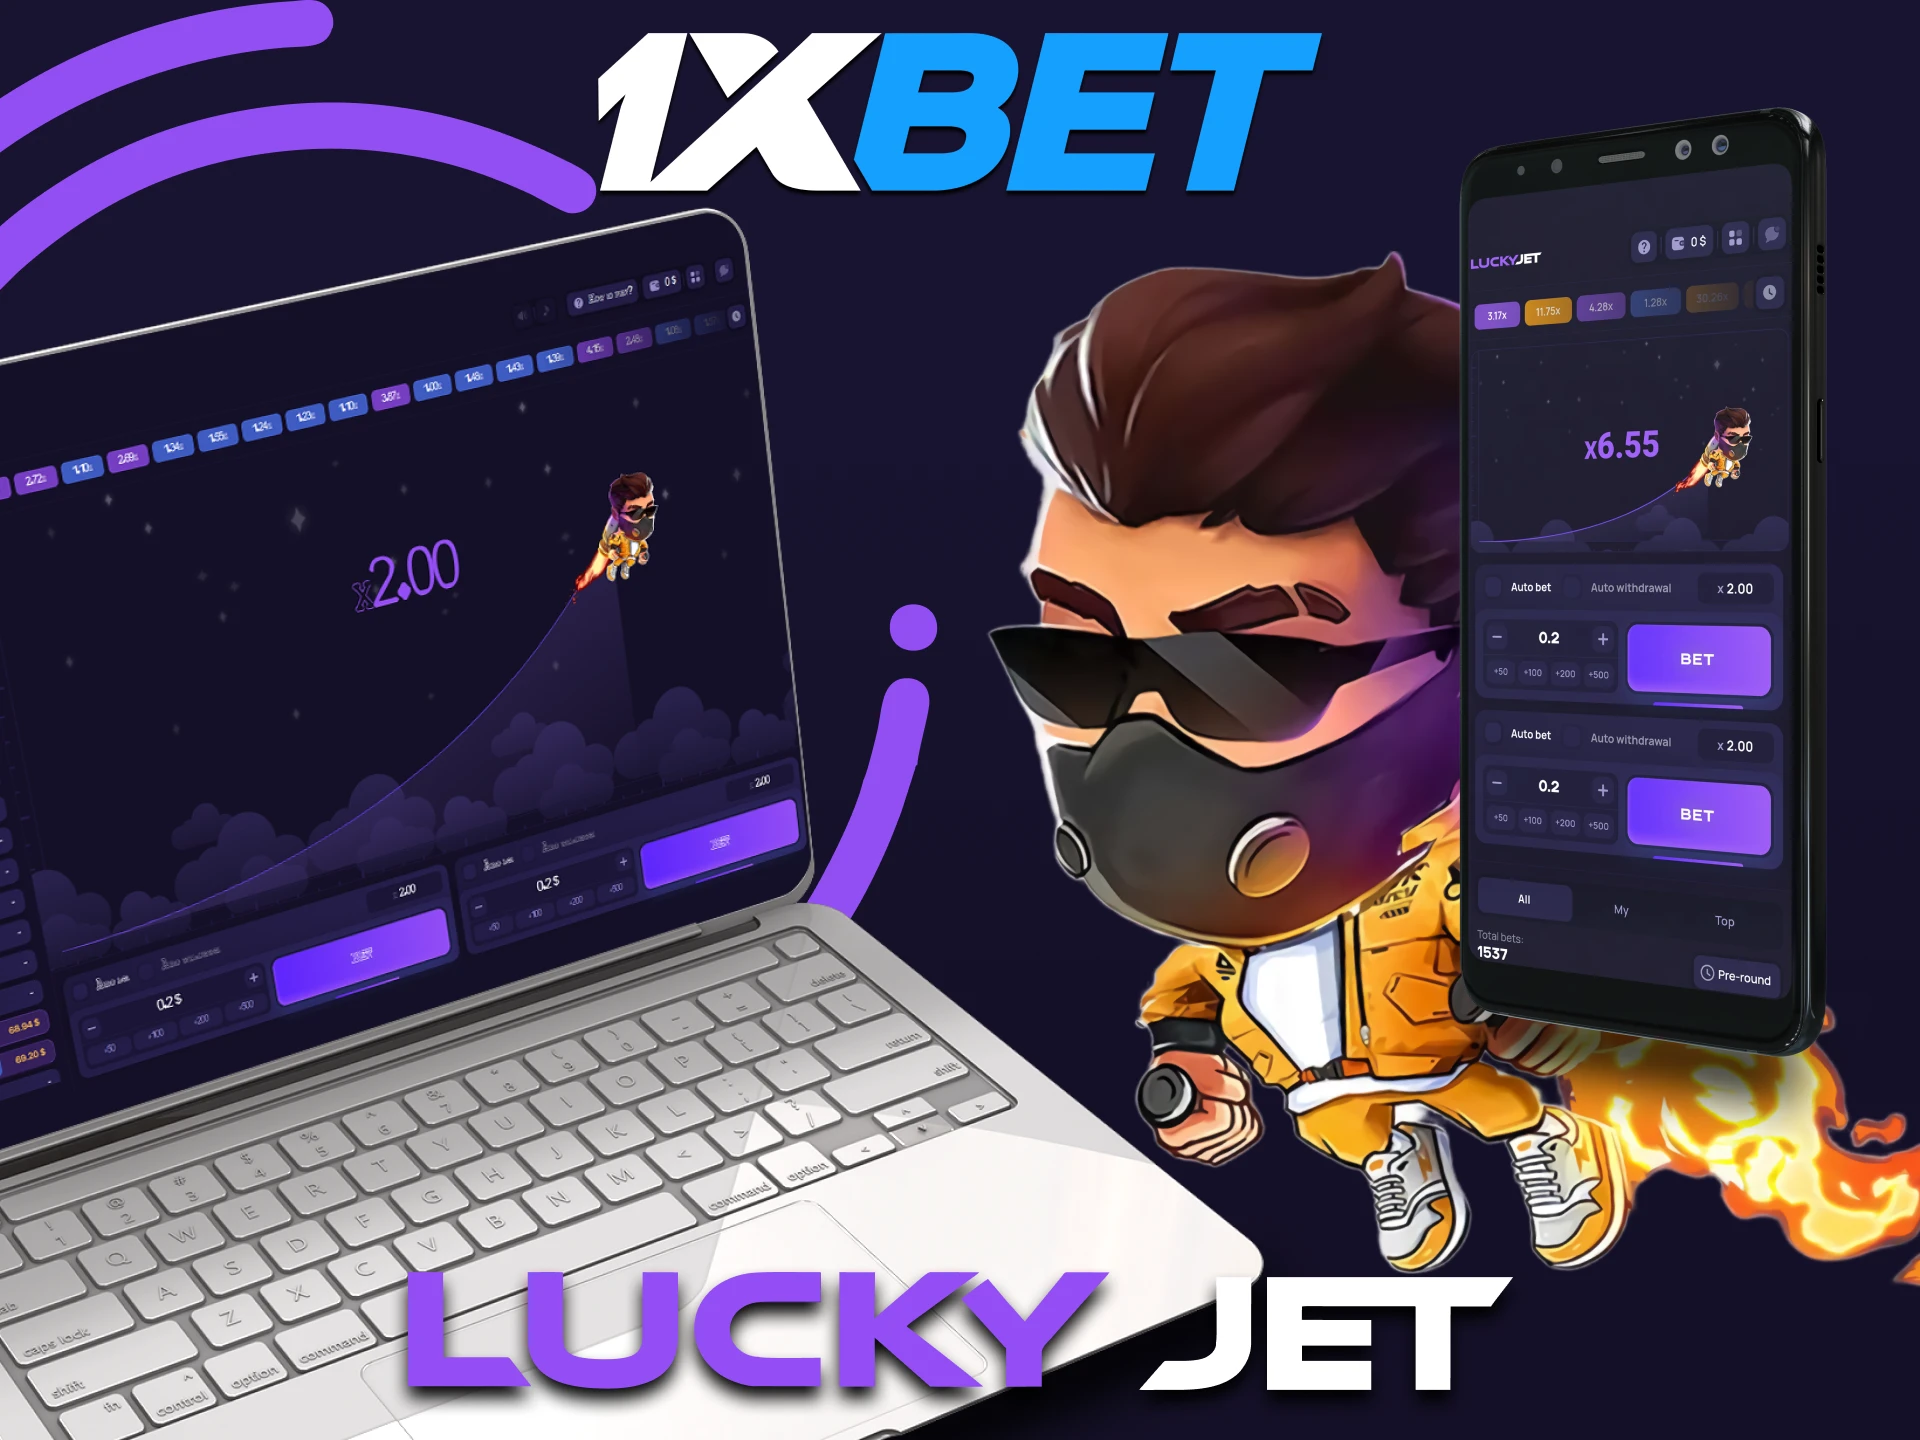 Learn about the differences between playing Lucky Jet through the mobile app and web version for PC.